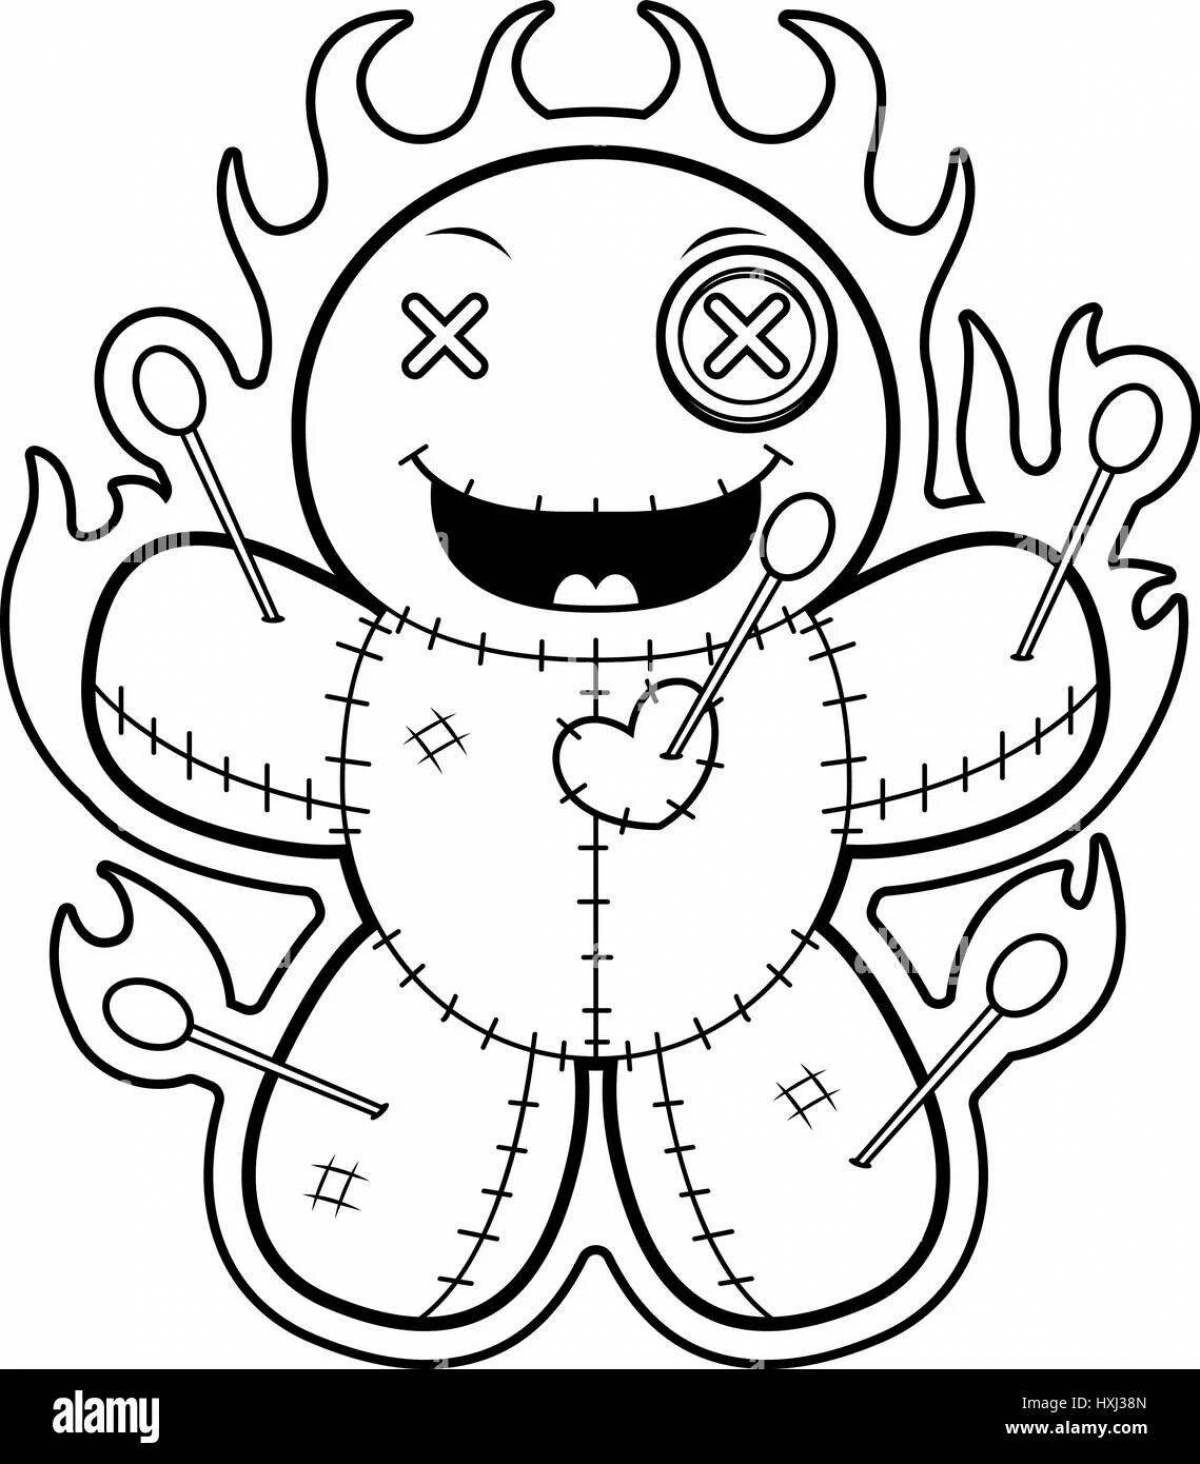 Outstanding Voodoo Doll Coloring Page